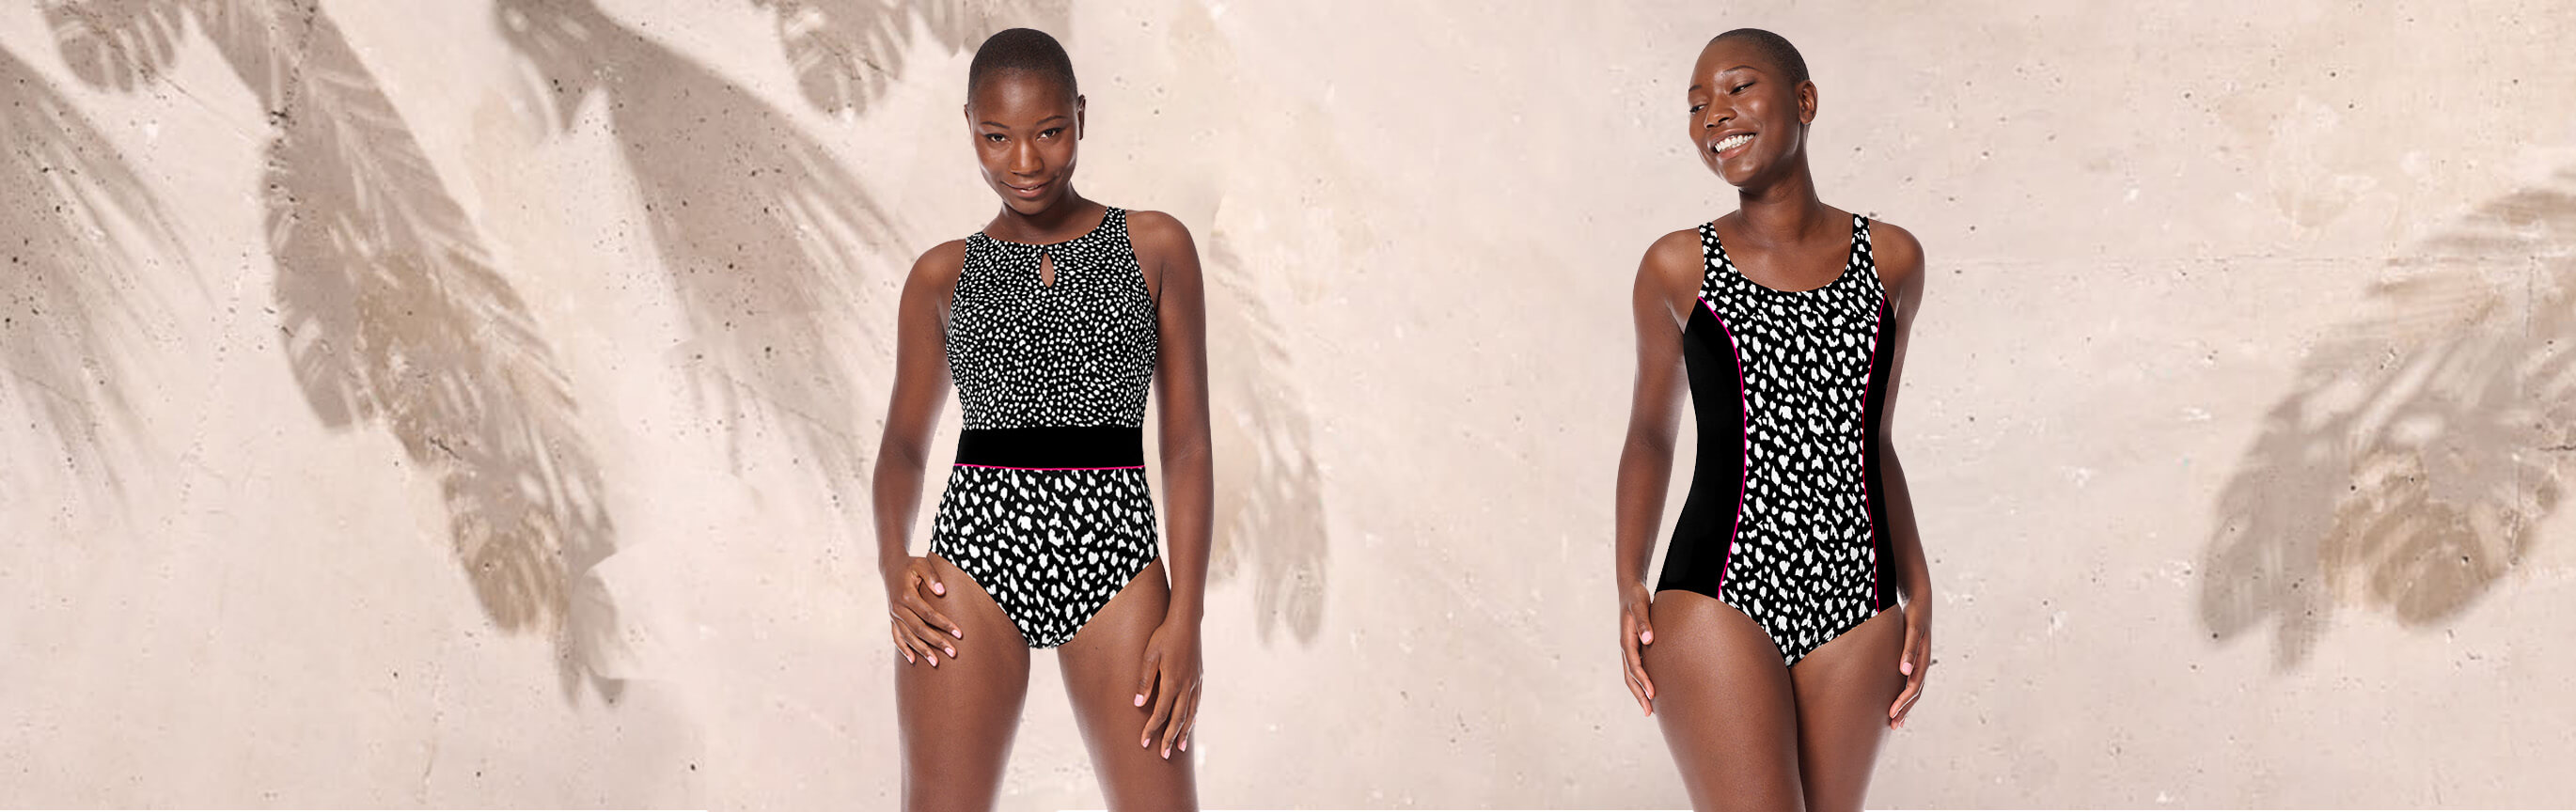 Pocketed One-Piece Swimsuits - Desktop